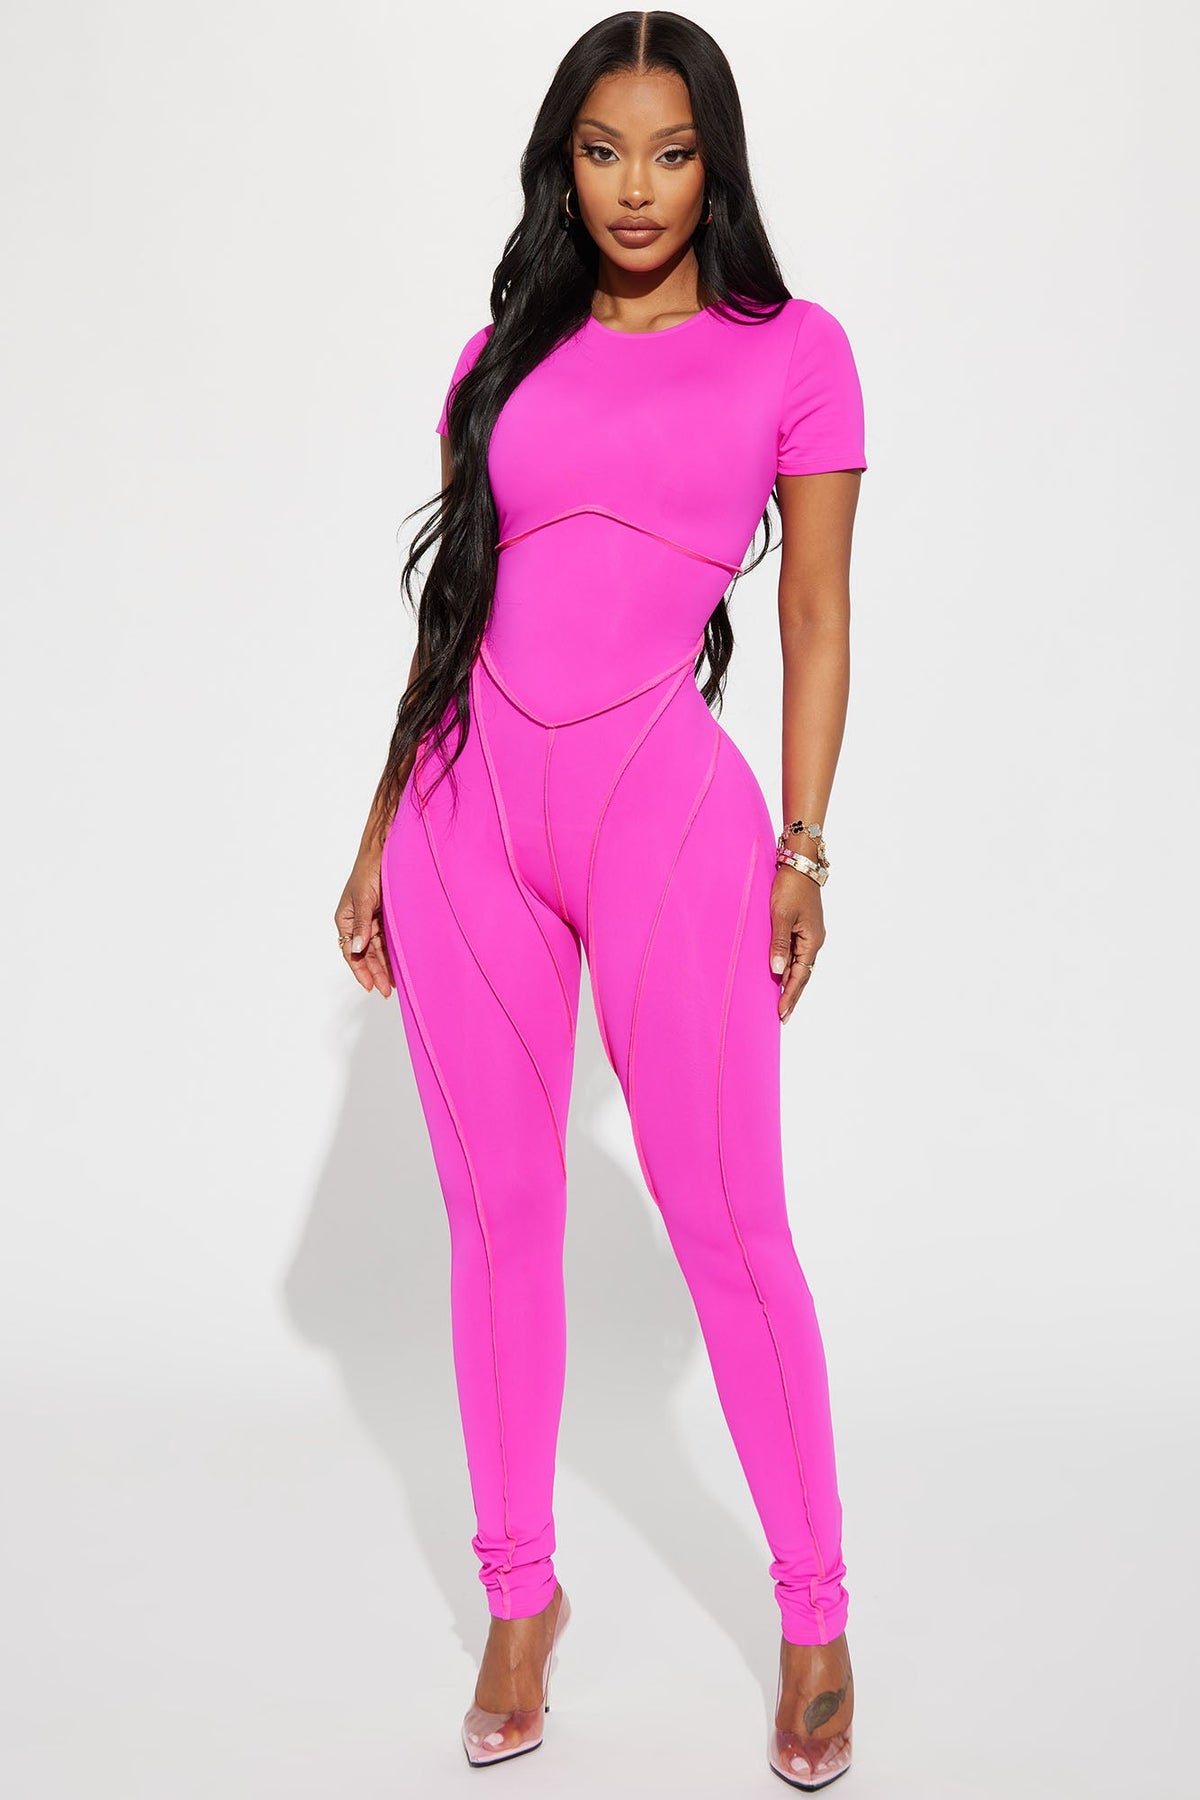 Play It Cool Short Sleeve Jumpsuit - Hot Pink